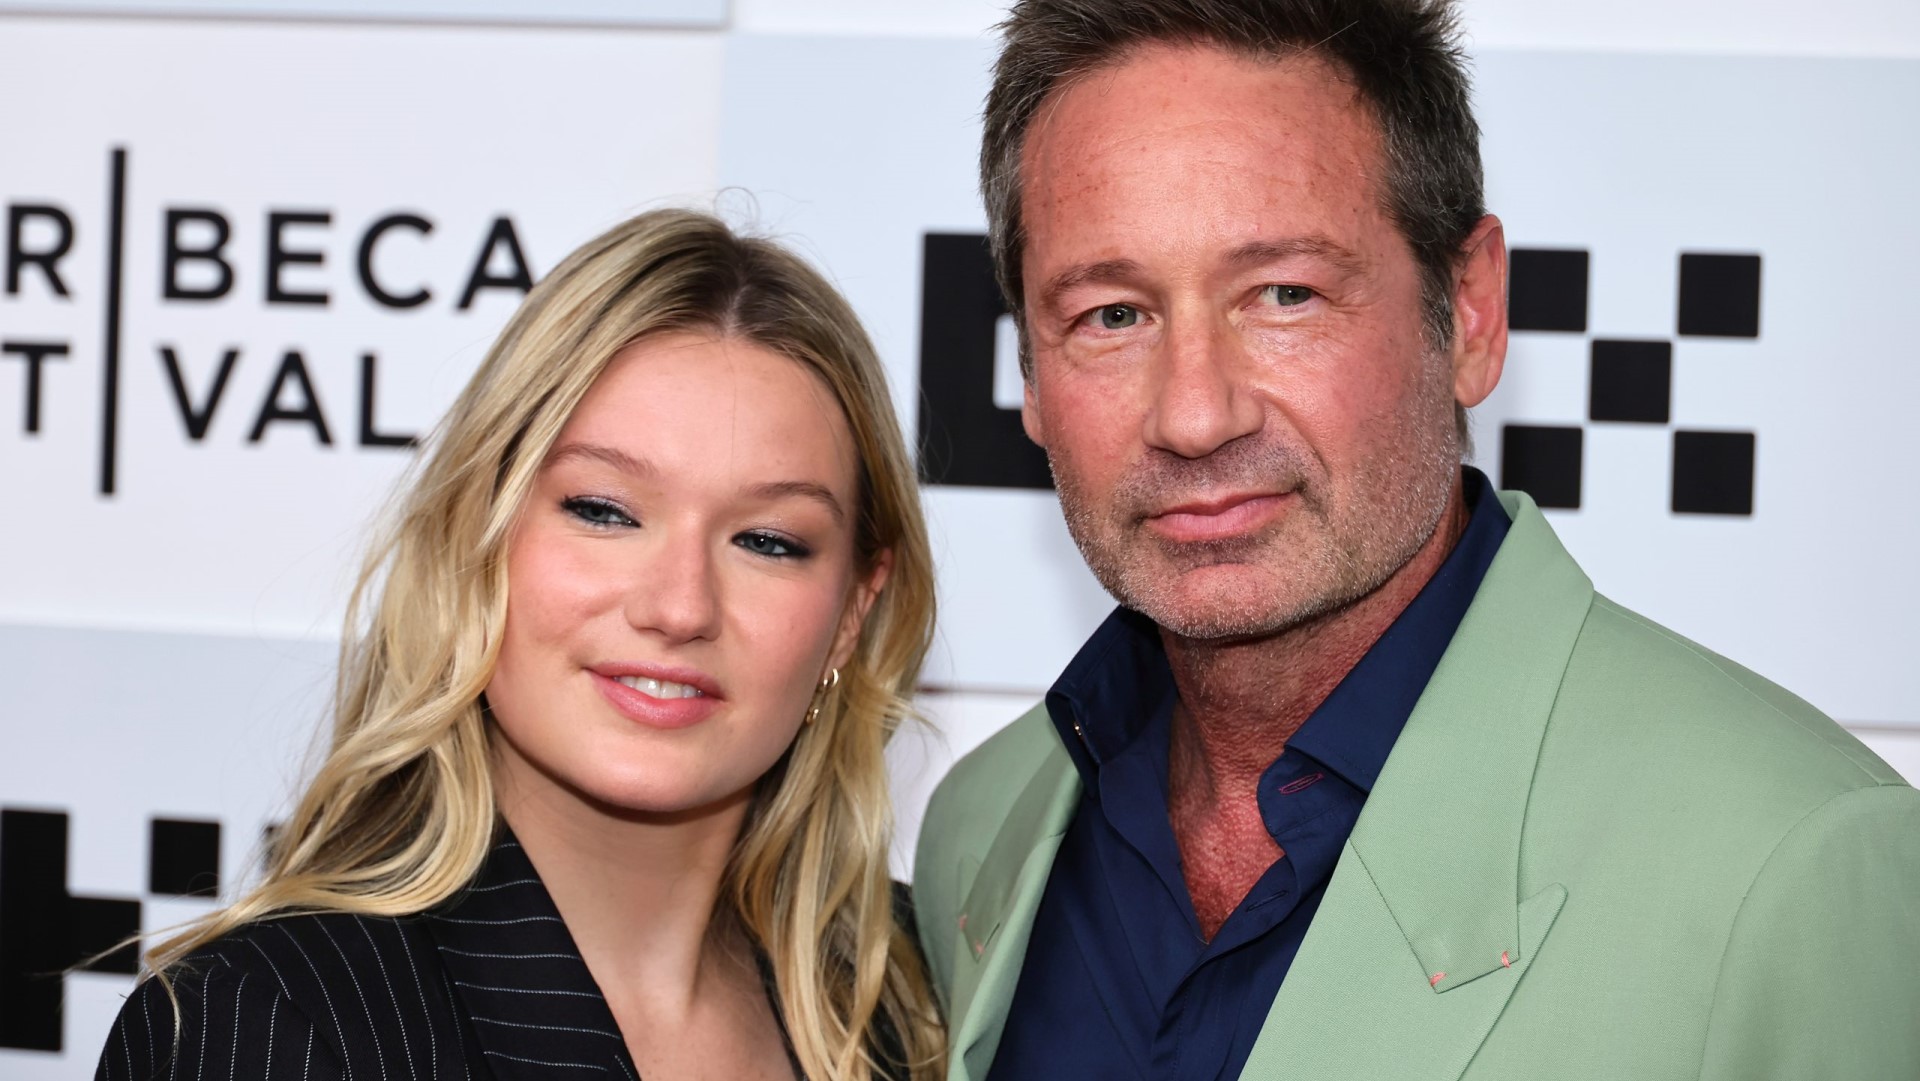 Meet West Duchovny, the daughter of David Duchovny and Téa Leoni